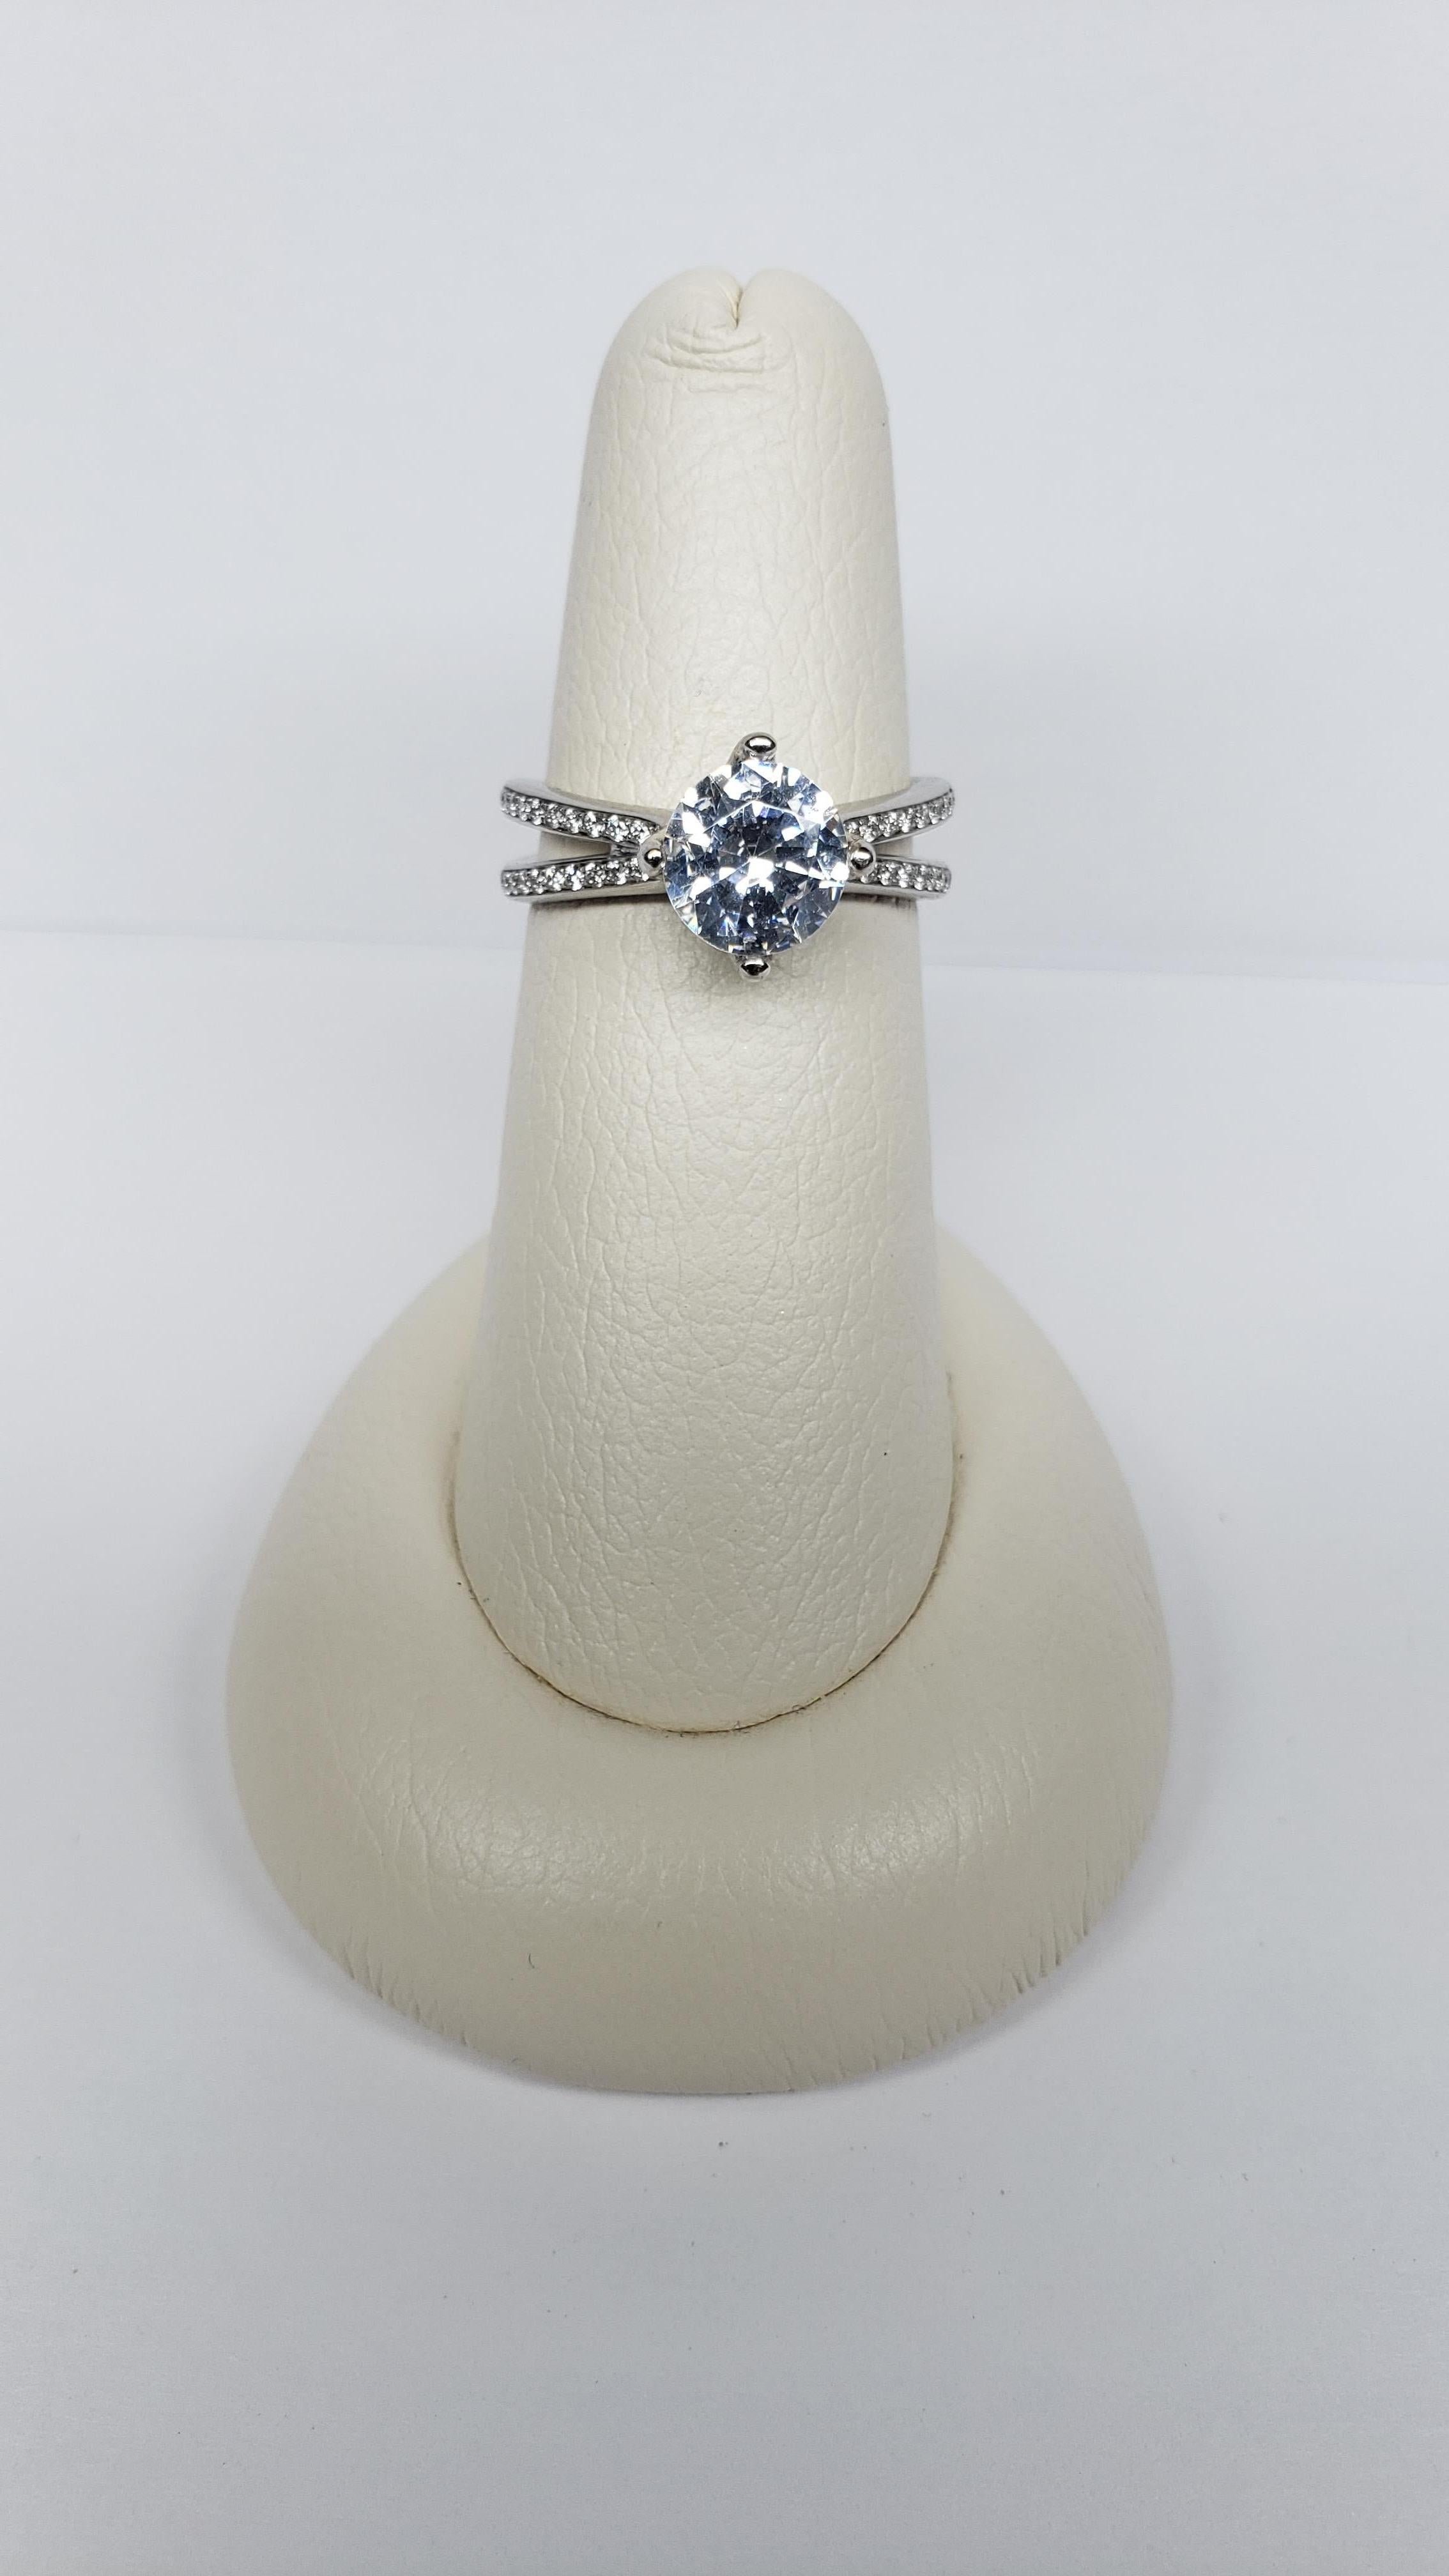 This semi mount is made from 18k white gold and was designed by Simon G. It features an elongated split shank with pave diamonds along the upper half. Diamonds also adorn the two split prongs on either side of the head. The total diamond weight is